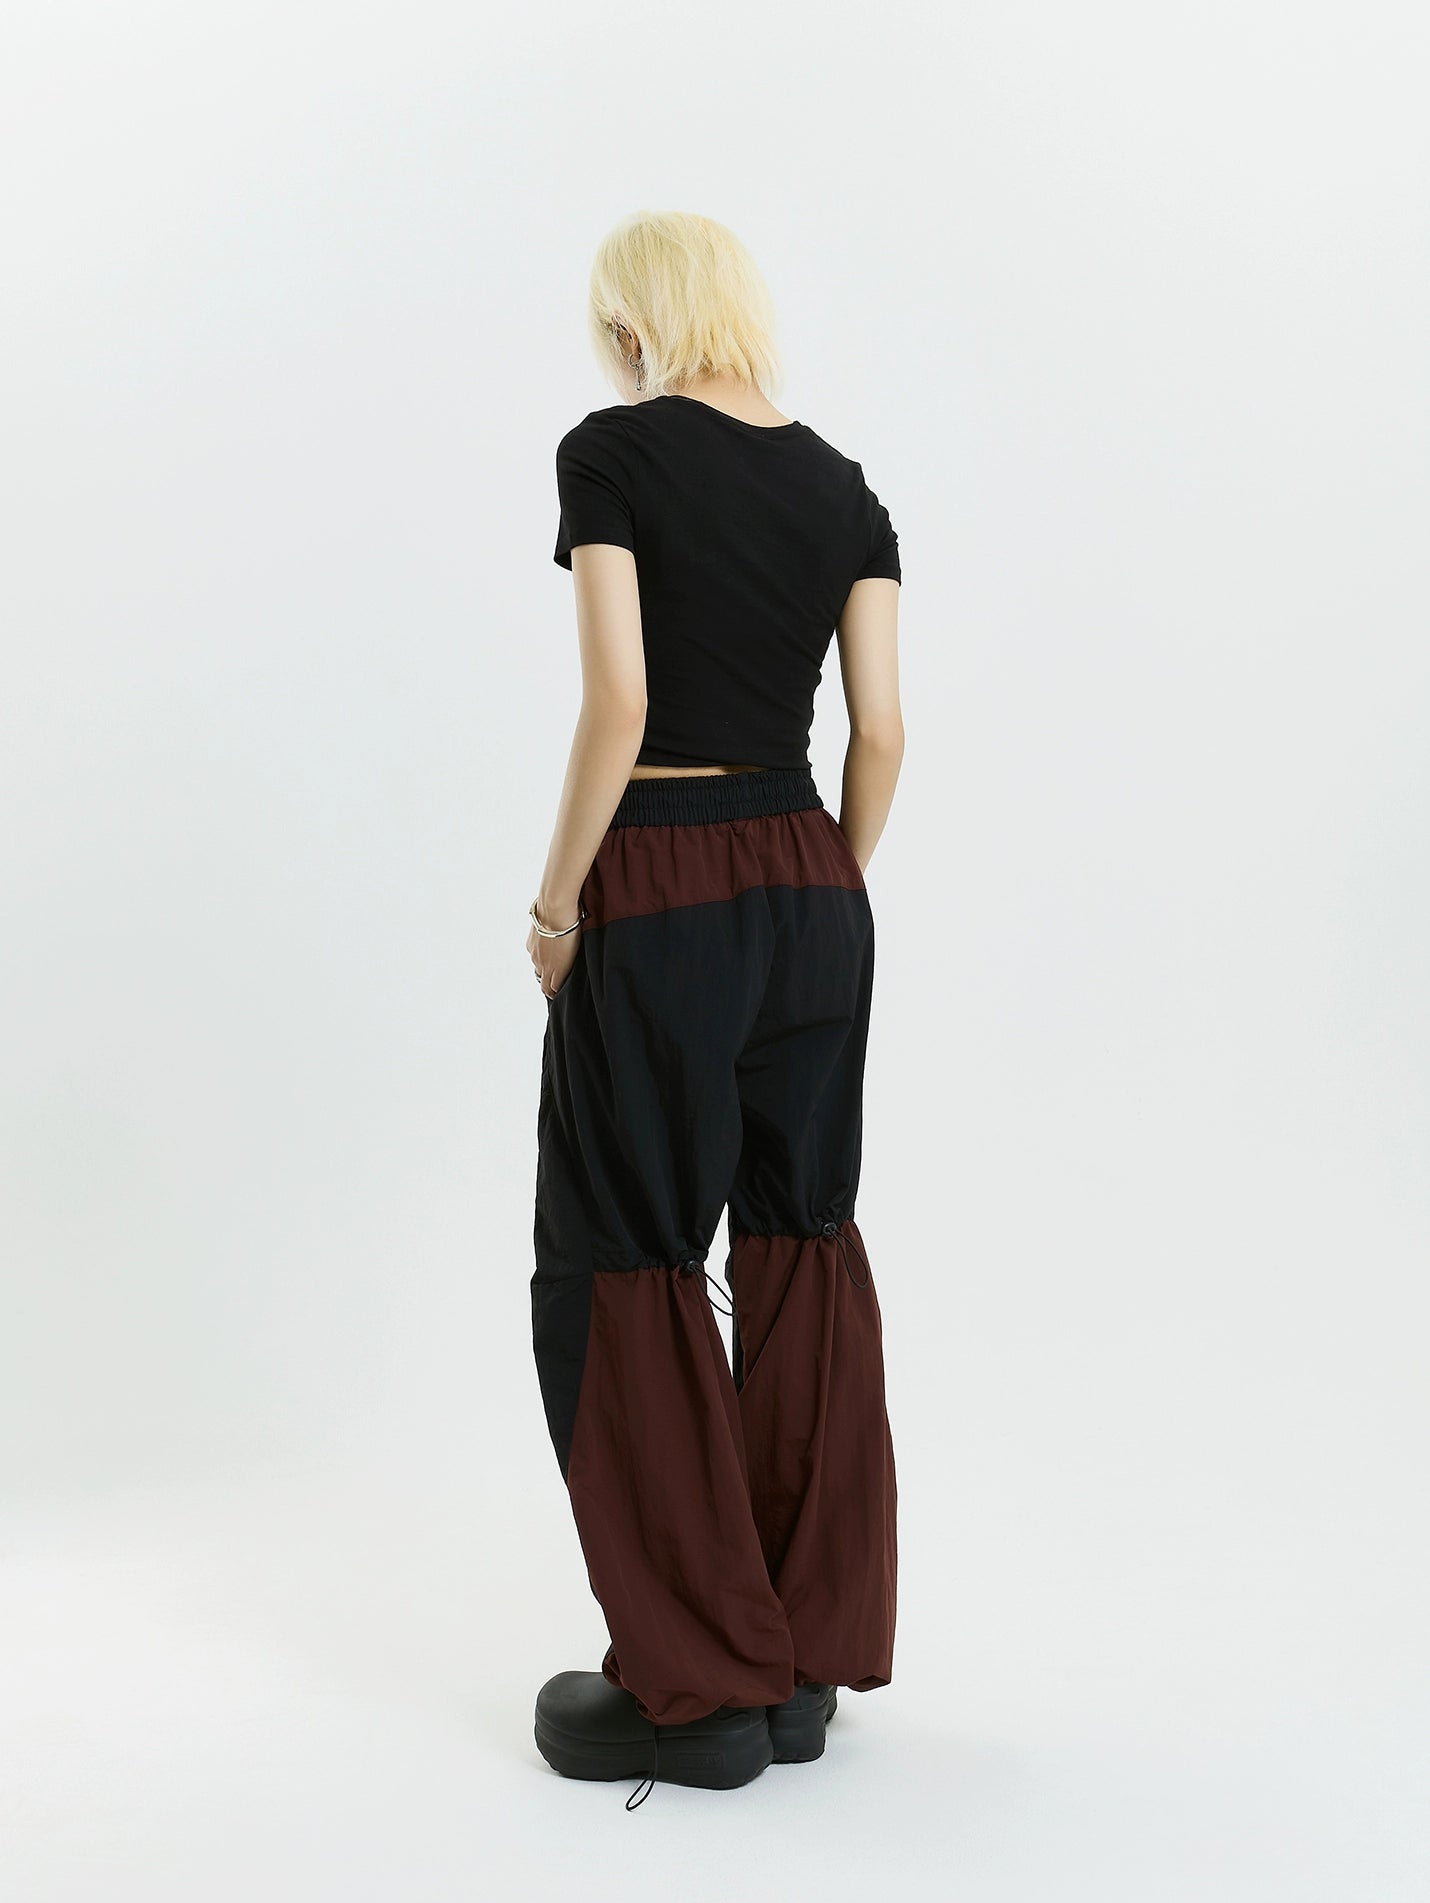 MICHINNYON thin, airy, wide-leg drawstring pockets with panels of contrasting quick-drying track cargo pants